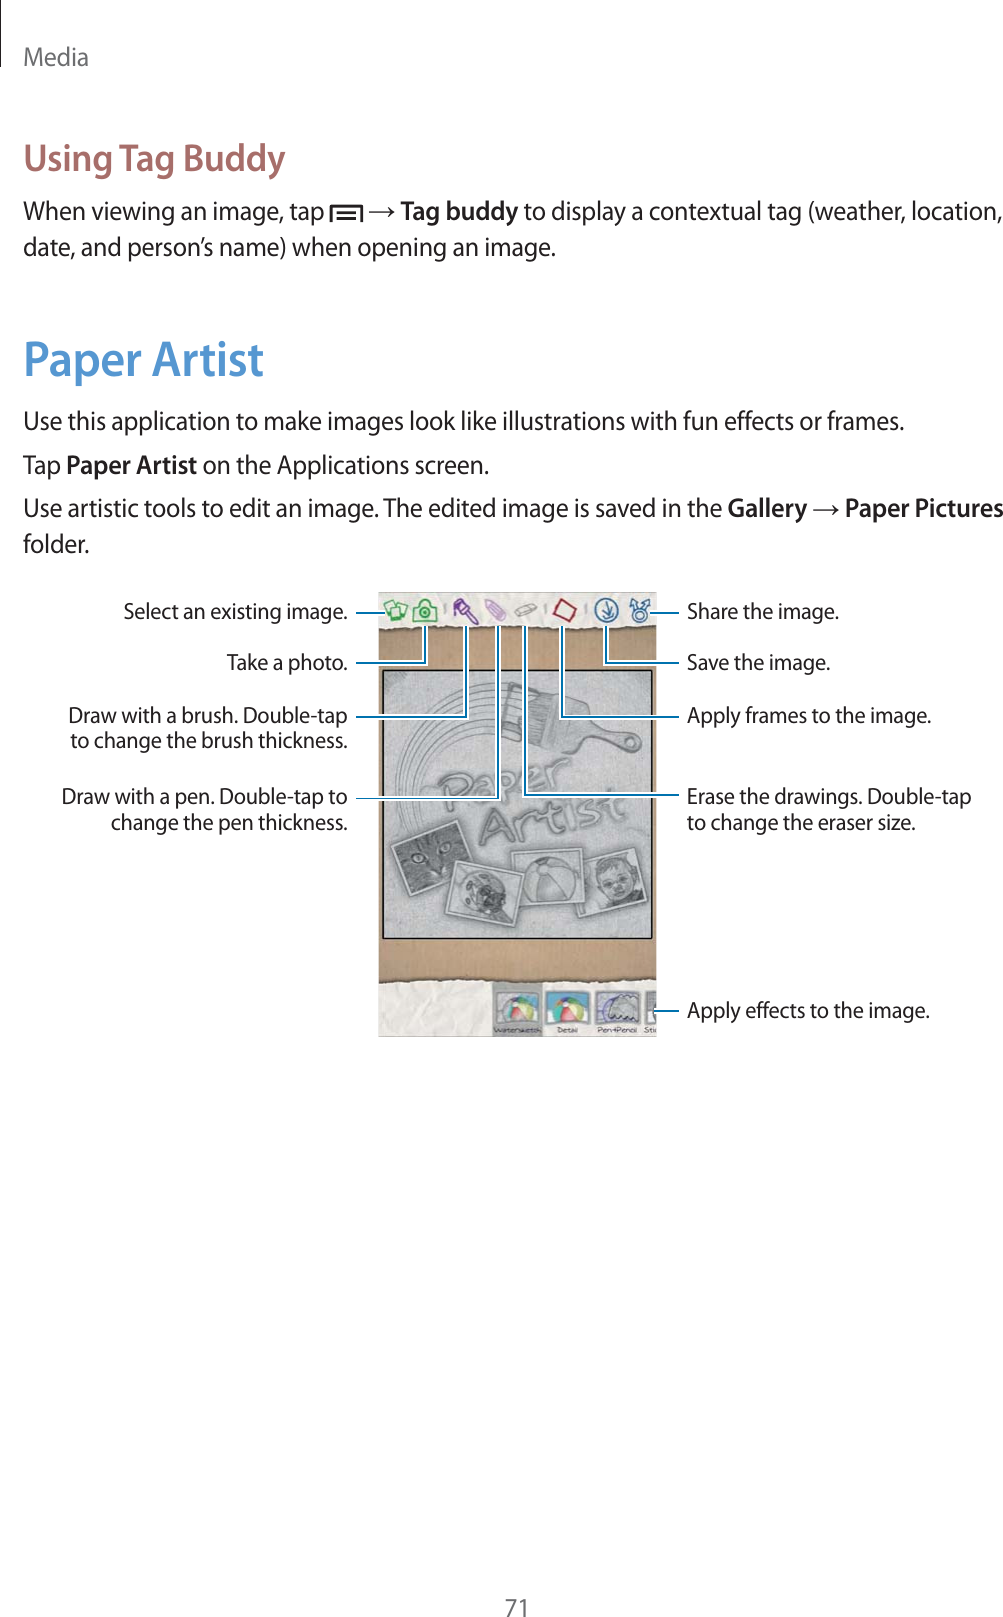 Media71Using Tag BuddyWhen viewing an image, tap   ĺ Tag buddy to display a contextual tag (weather, location, date, and person’s name) when opening an image.Paper ArtistUse this application to make images look like illustrations with fun effects or frames.Tap Paper Artist on the Applications screen.Use artistic tools to edit an image. The edited image is saved in the Gallery ĺ Paper Pictures folder.Select an existing image. Share the image.Apply effects to the image.Draw with a pen. Double-tap to change the pen thickness.Take a photo.Draw with a brush. Double-tap to change the brush thickness.Save the image.Apply frames to the image.Erase the drawings. Double-tap to change the eraser size.